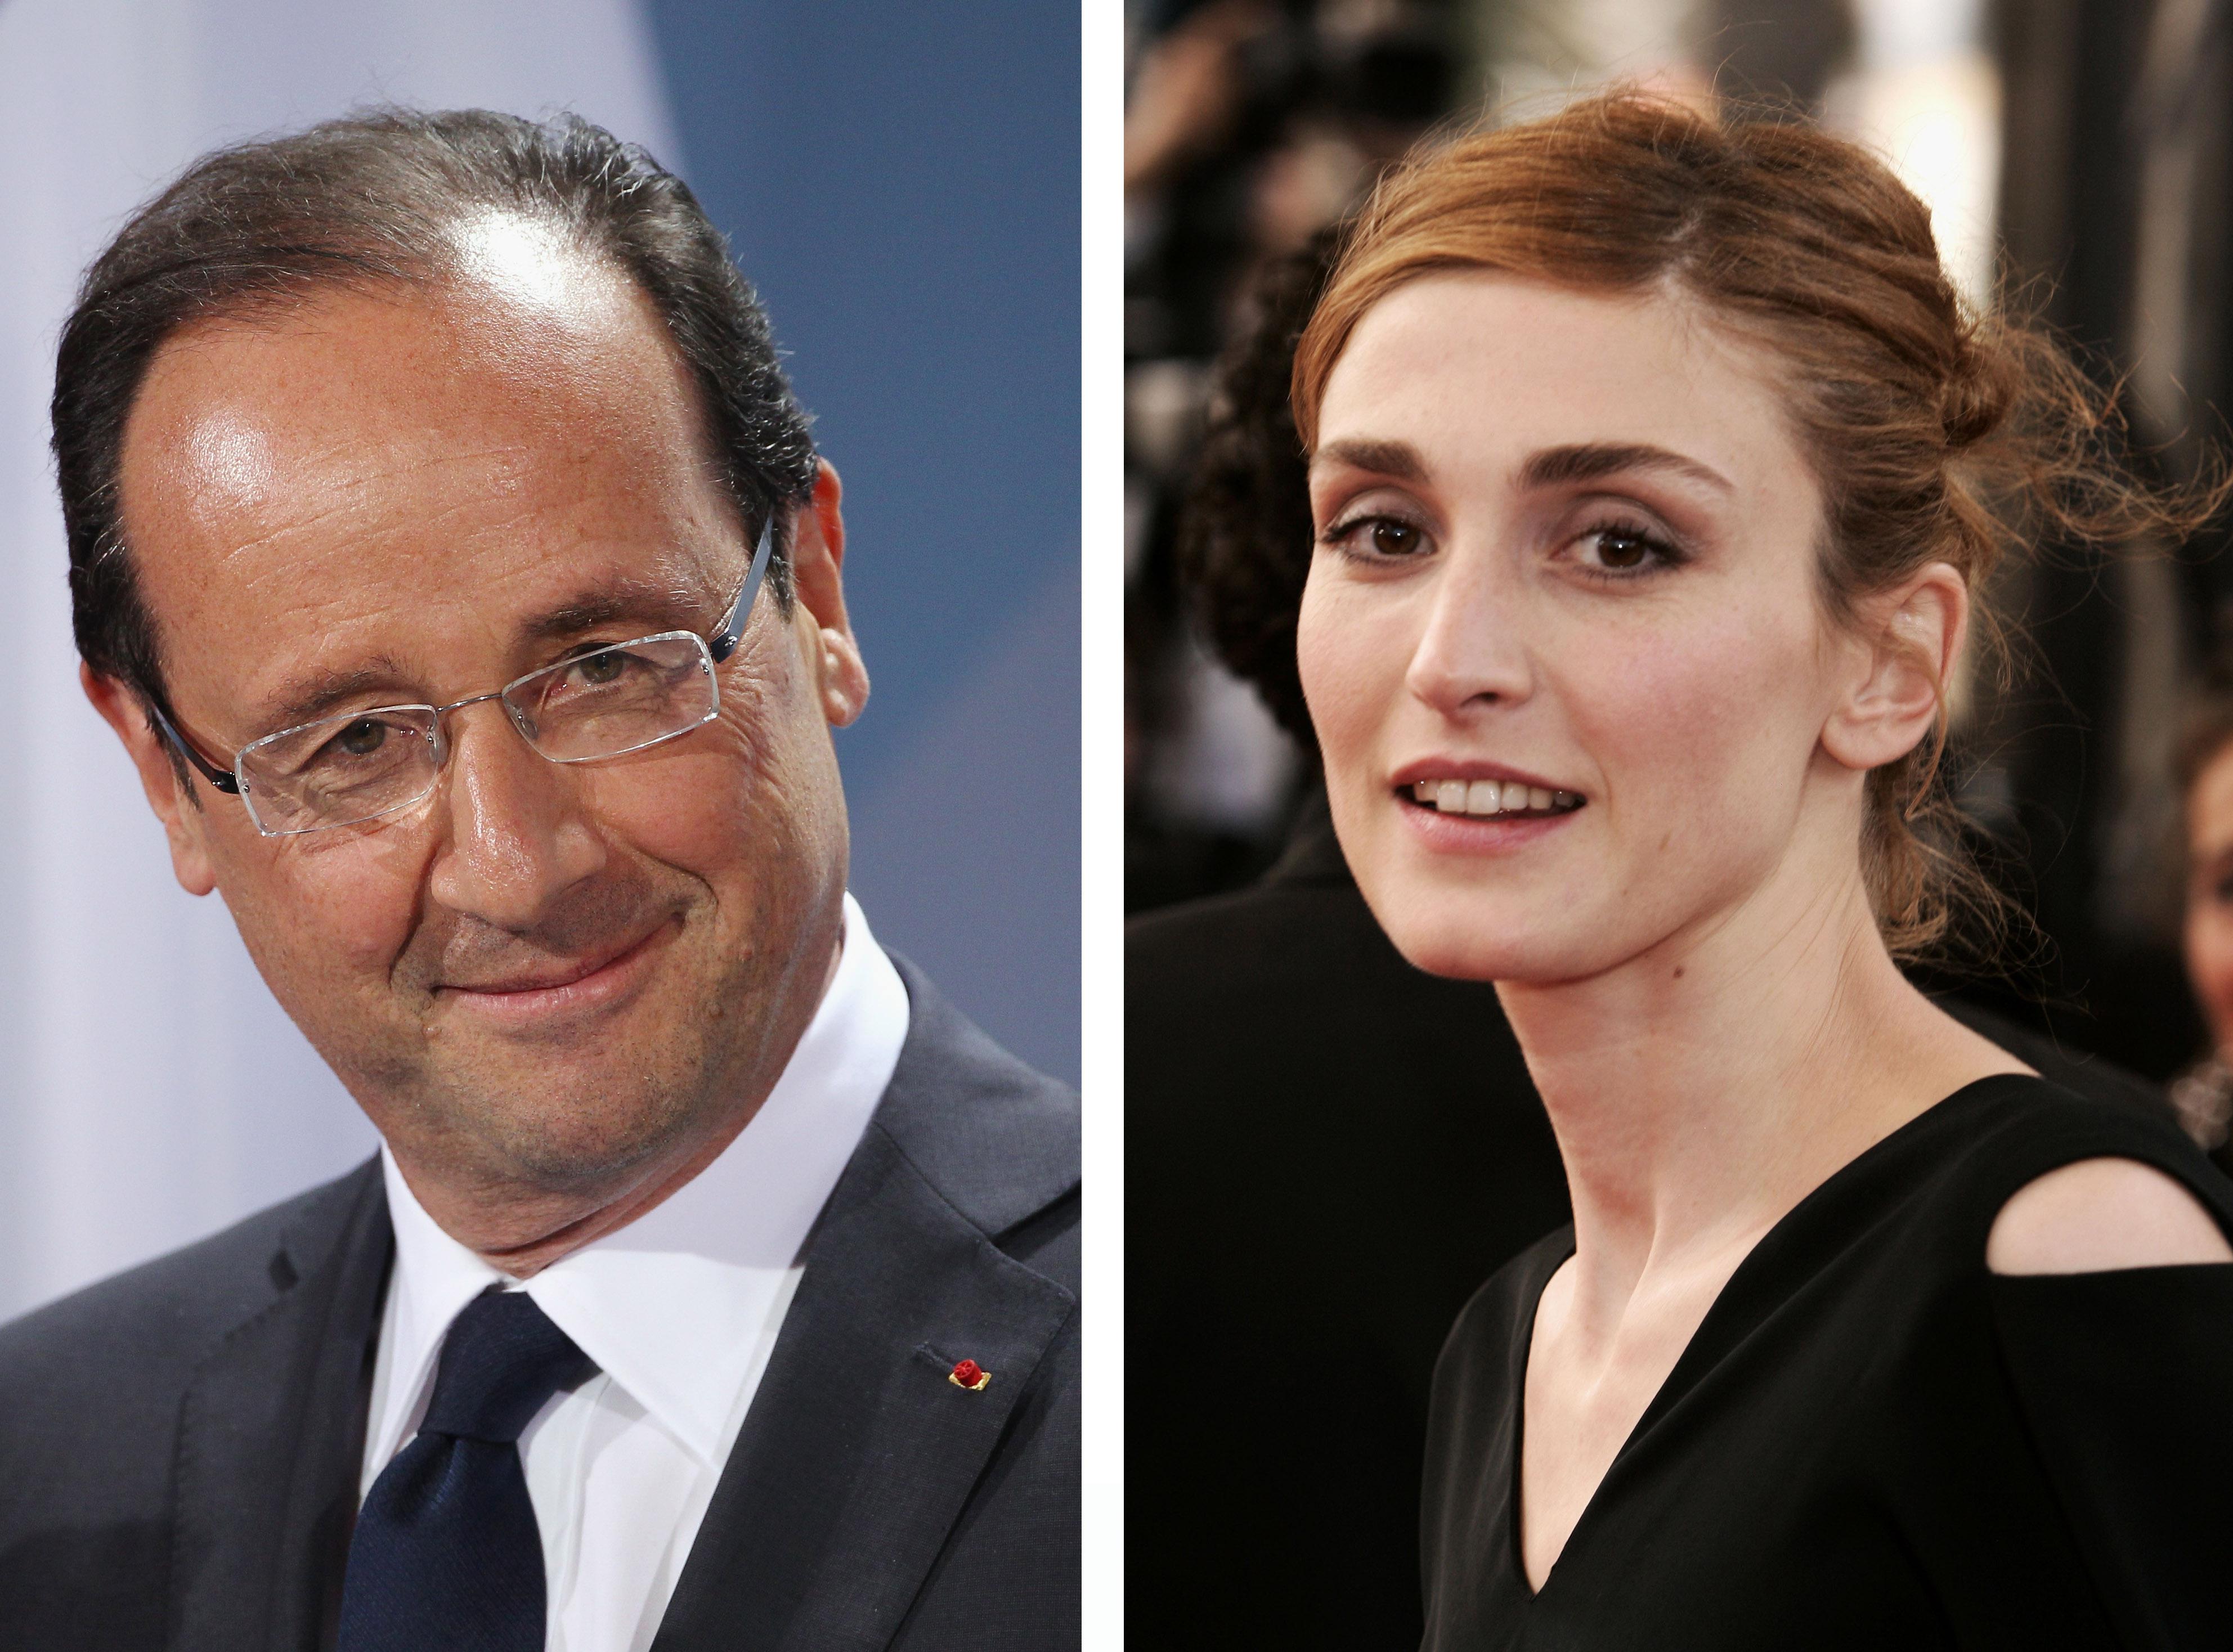 Francois Hollande and Julie Gayet The French do care about their presidents sex life. image pic